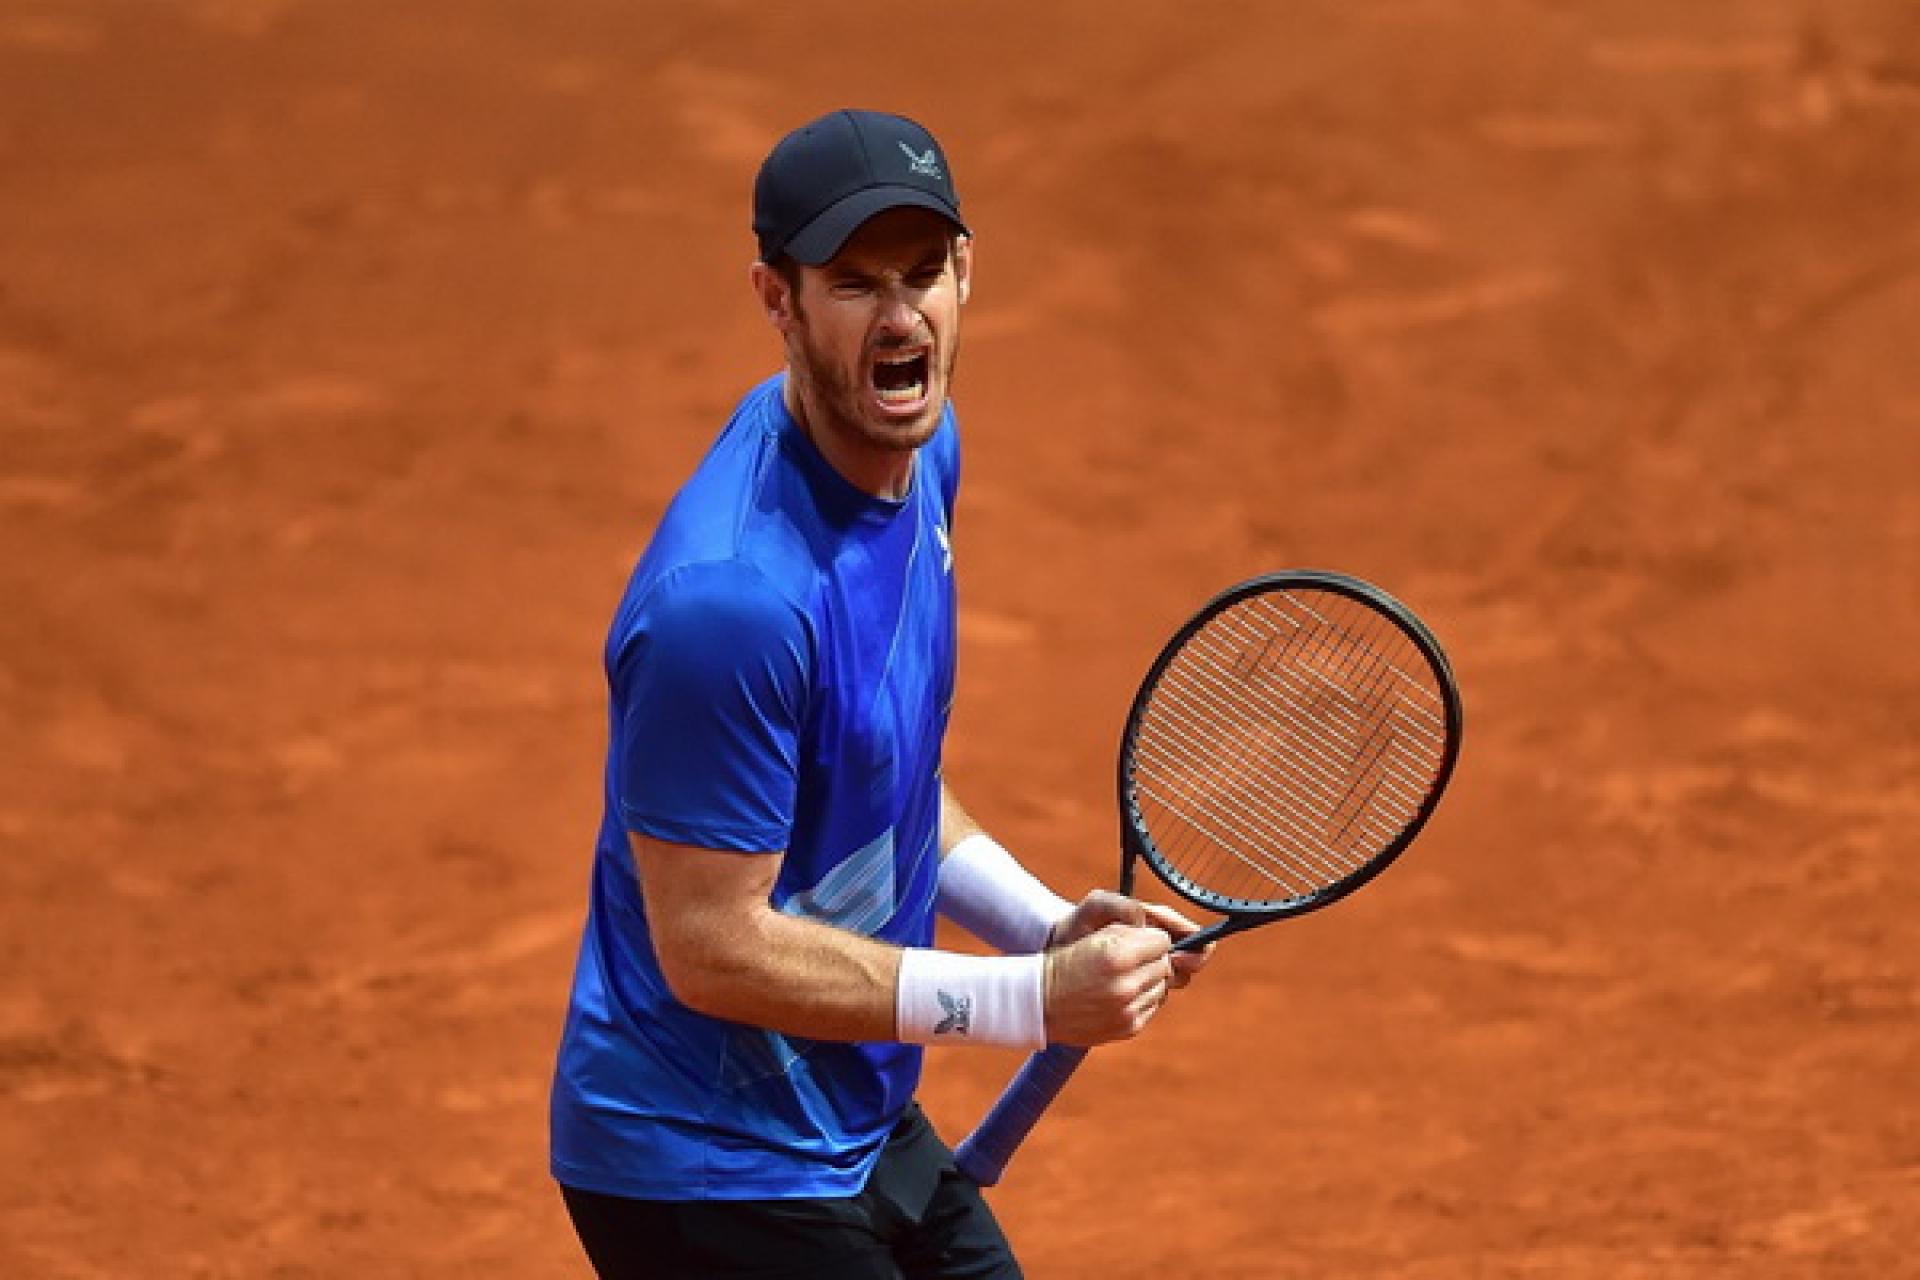 French Open 2022 LIVE Andy Murray withdraws from French Open, will focus on preparing for Wimbledon 2022